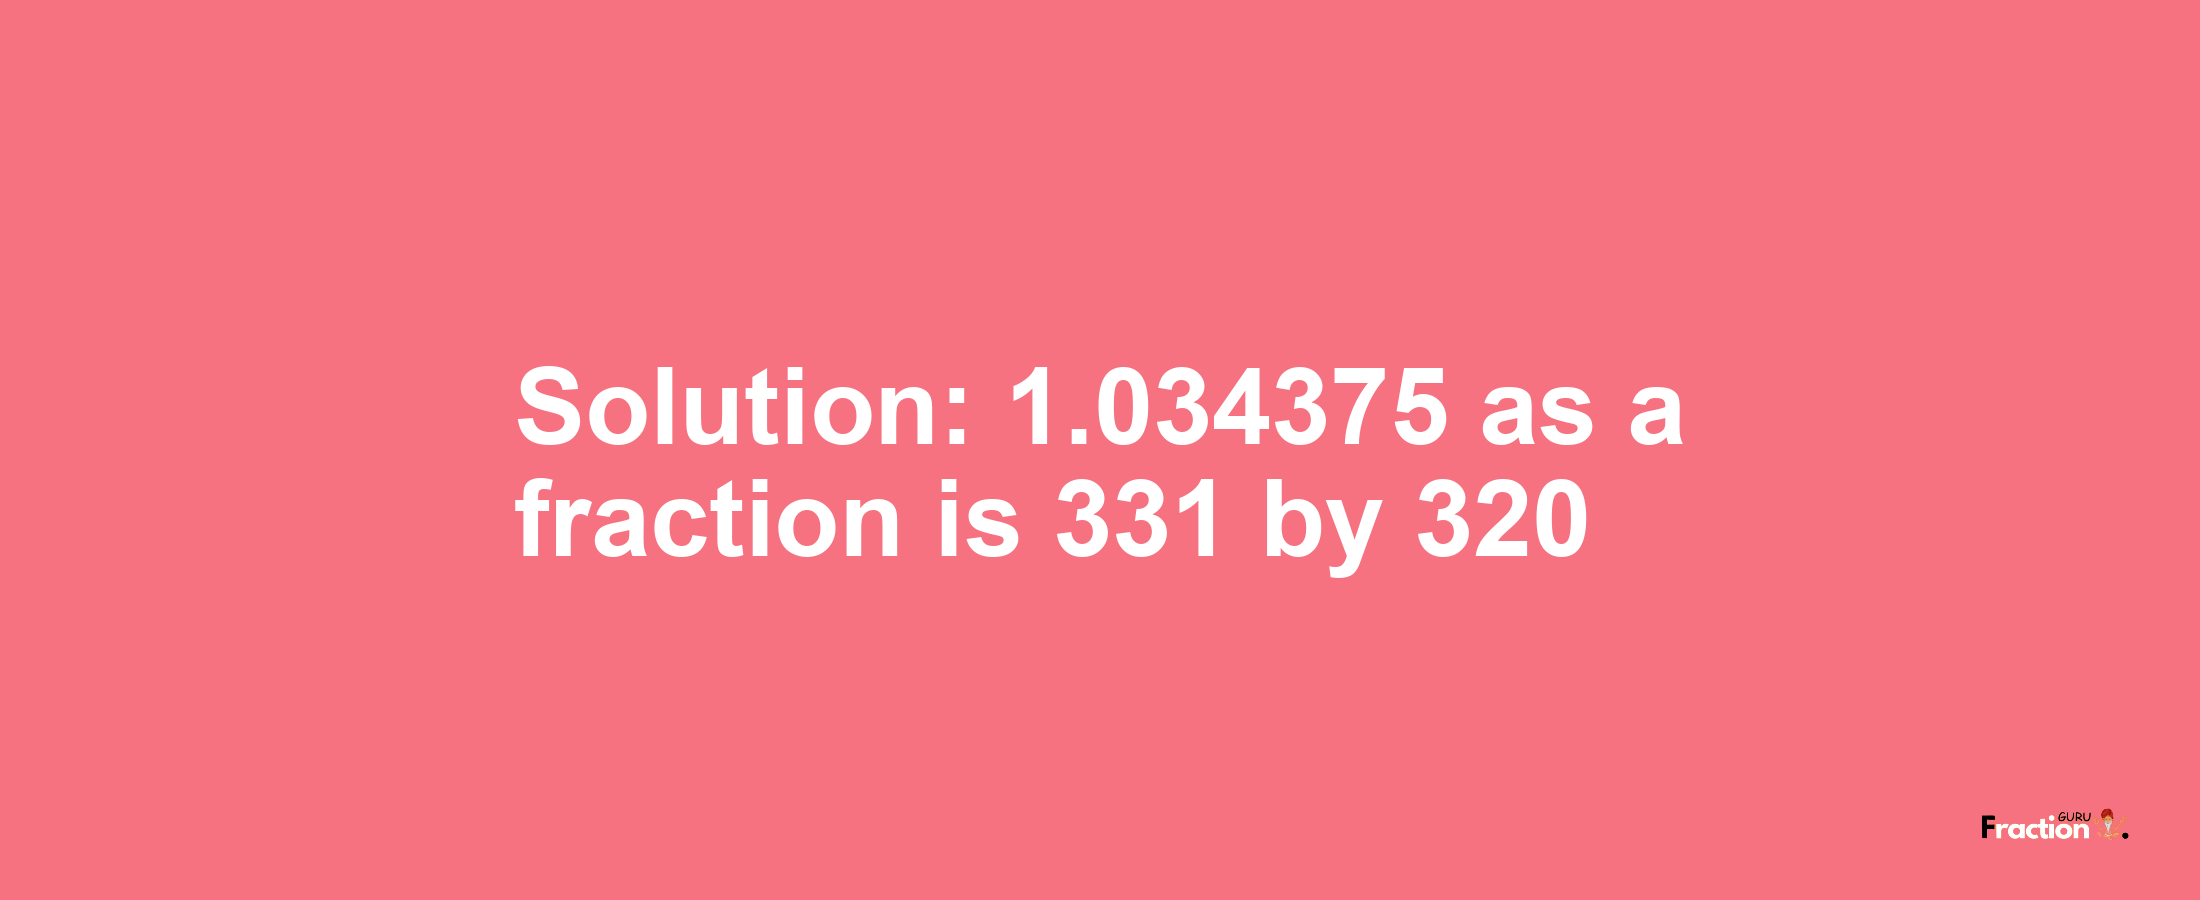 Solution:1.034375 as a fraction is 331/320